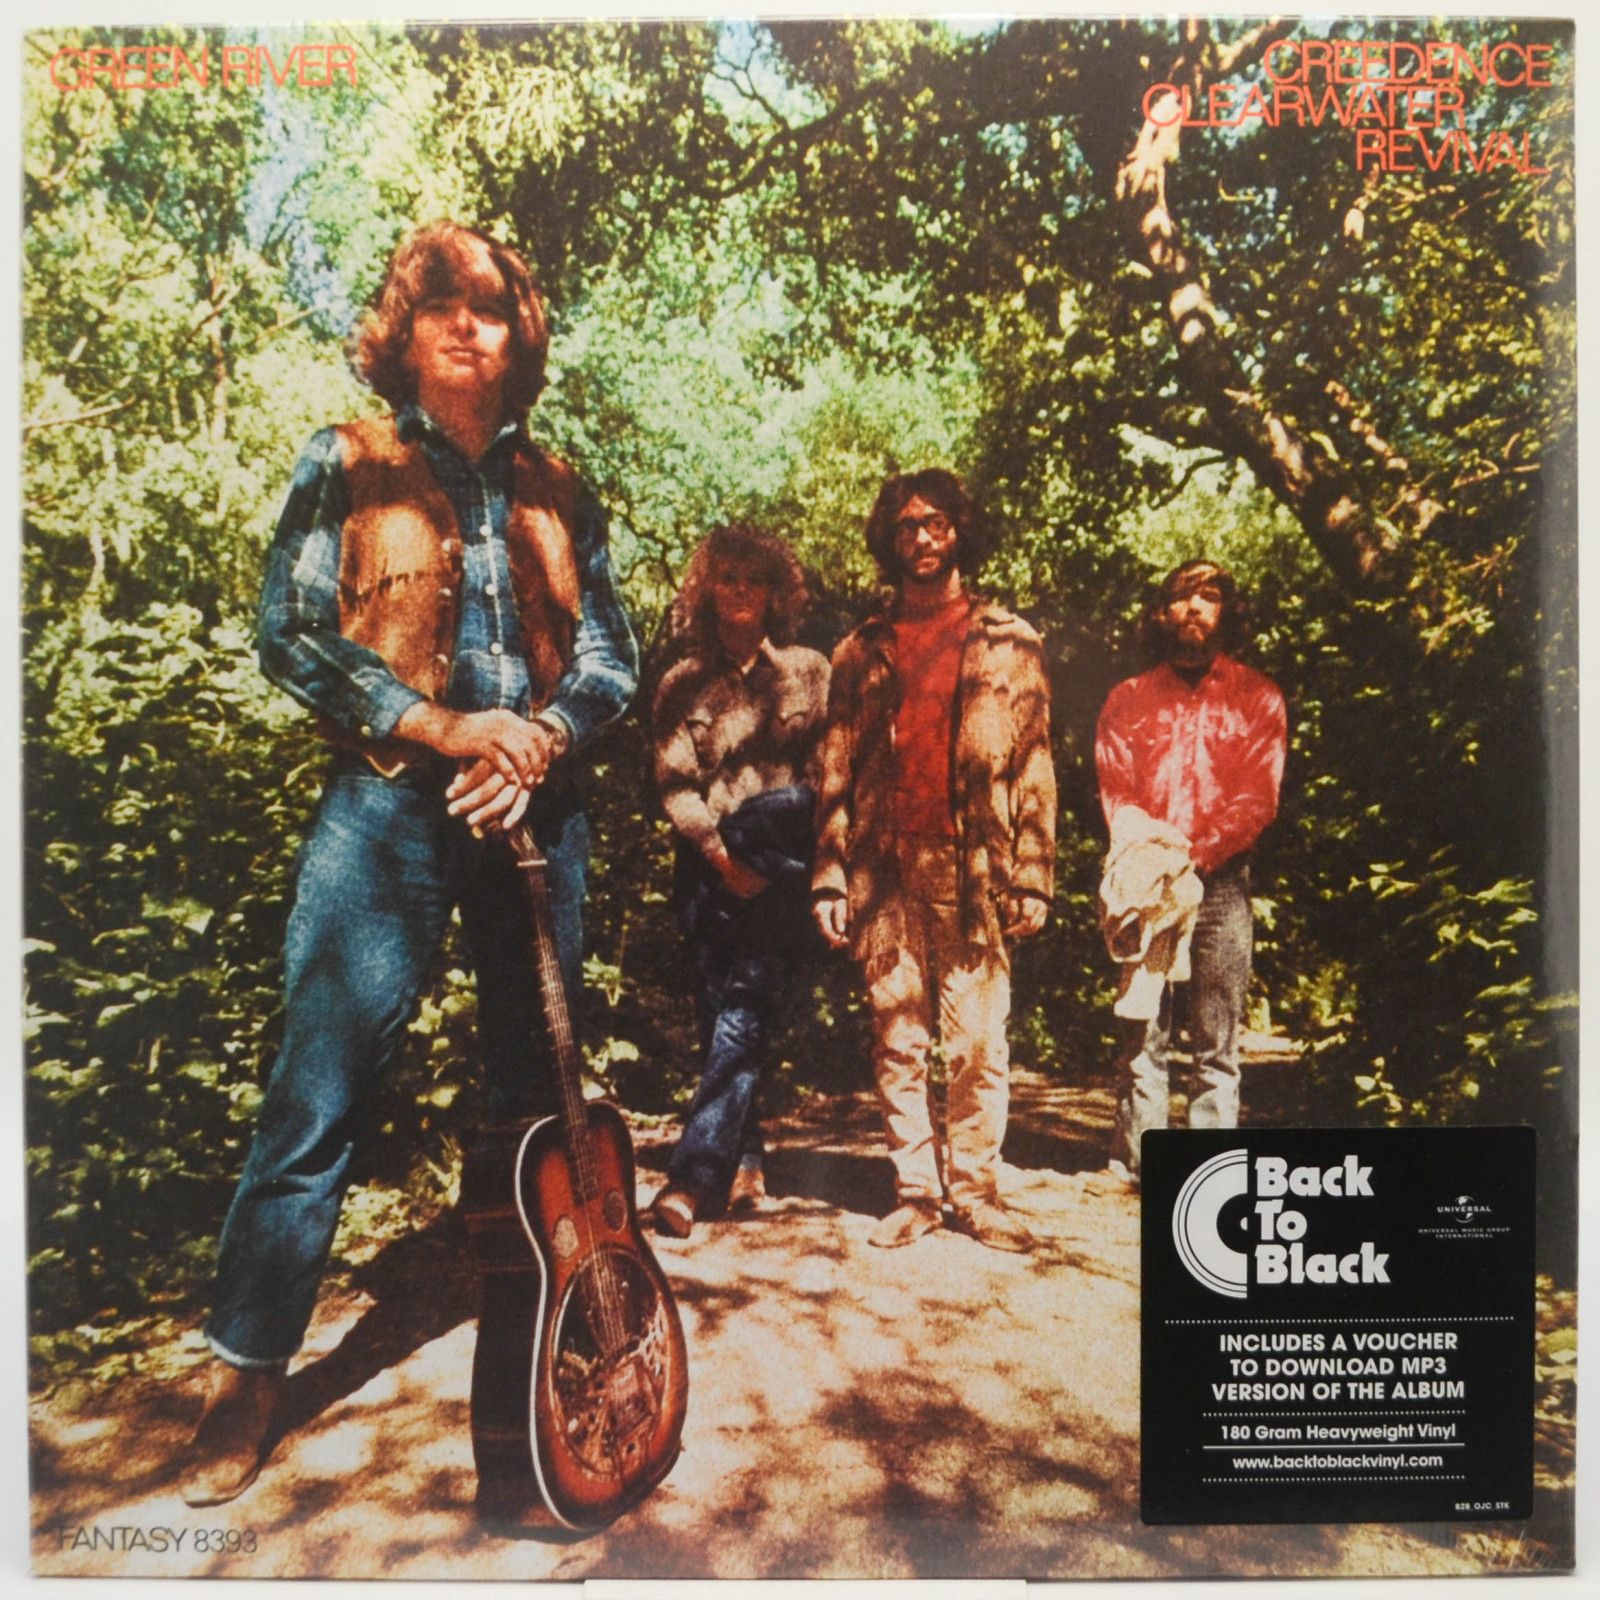 Creedence Clearwater Revival — Green River, 1969